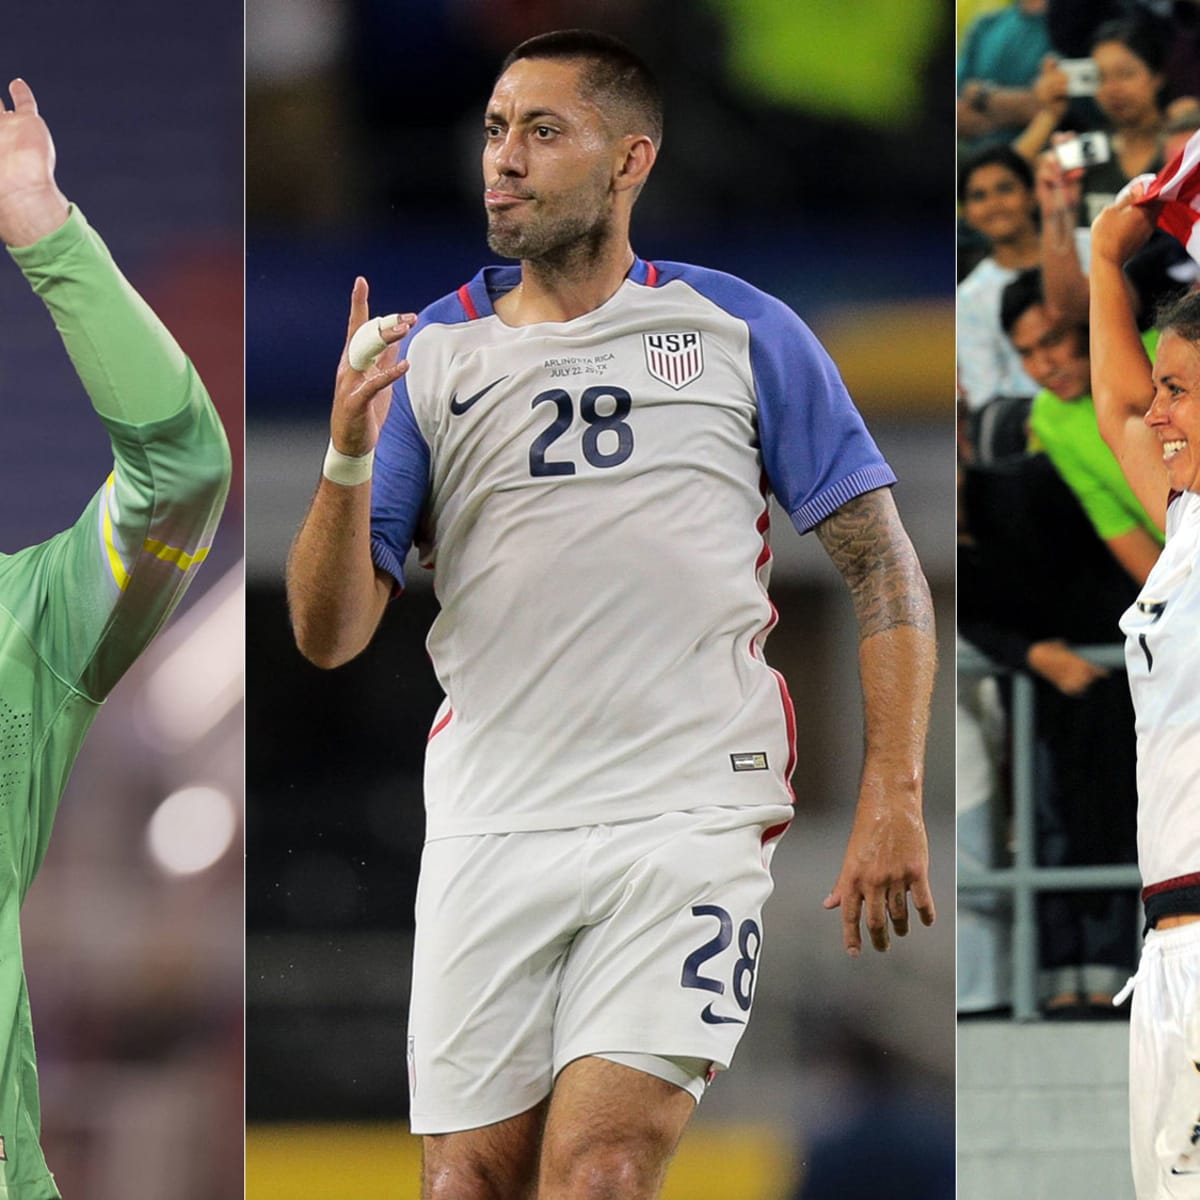 Clint Dempsey Elected to National Soccer Hall of Fame